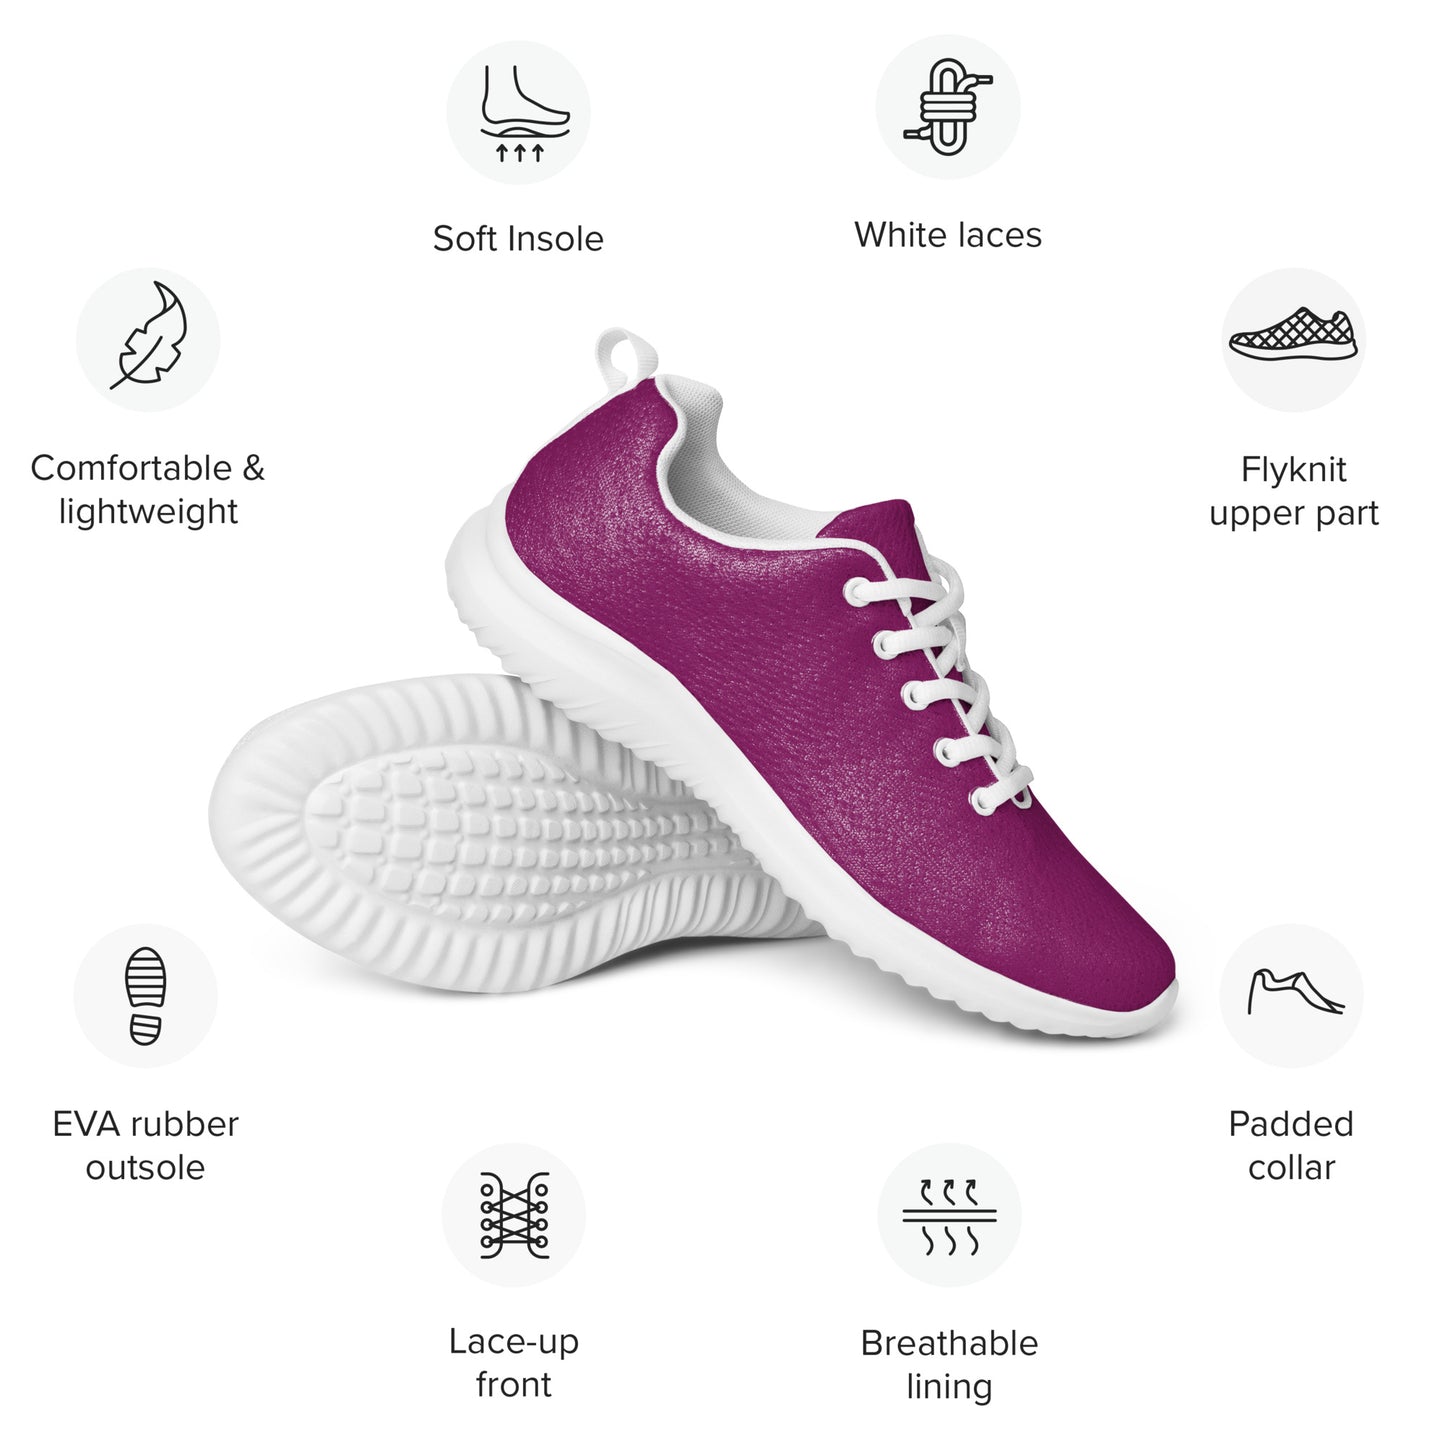 DASH Berry Women’s Athletic Shoes Lightweight Breathable Design by IOBI Original Apparel